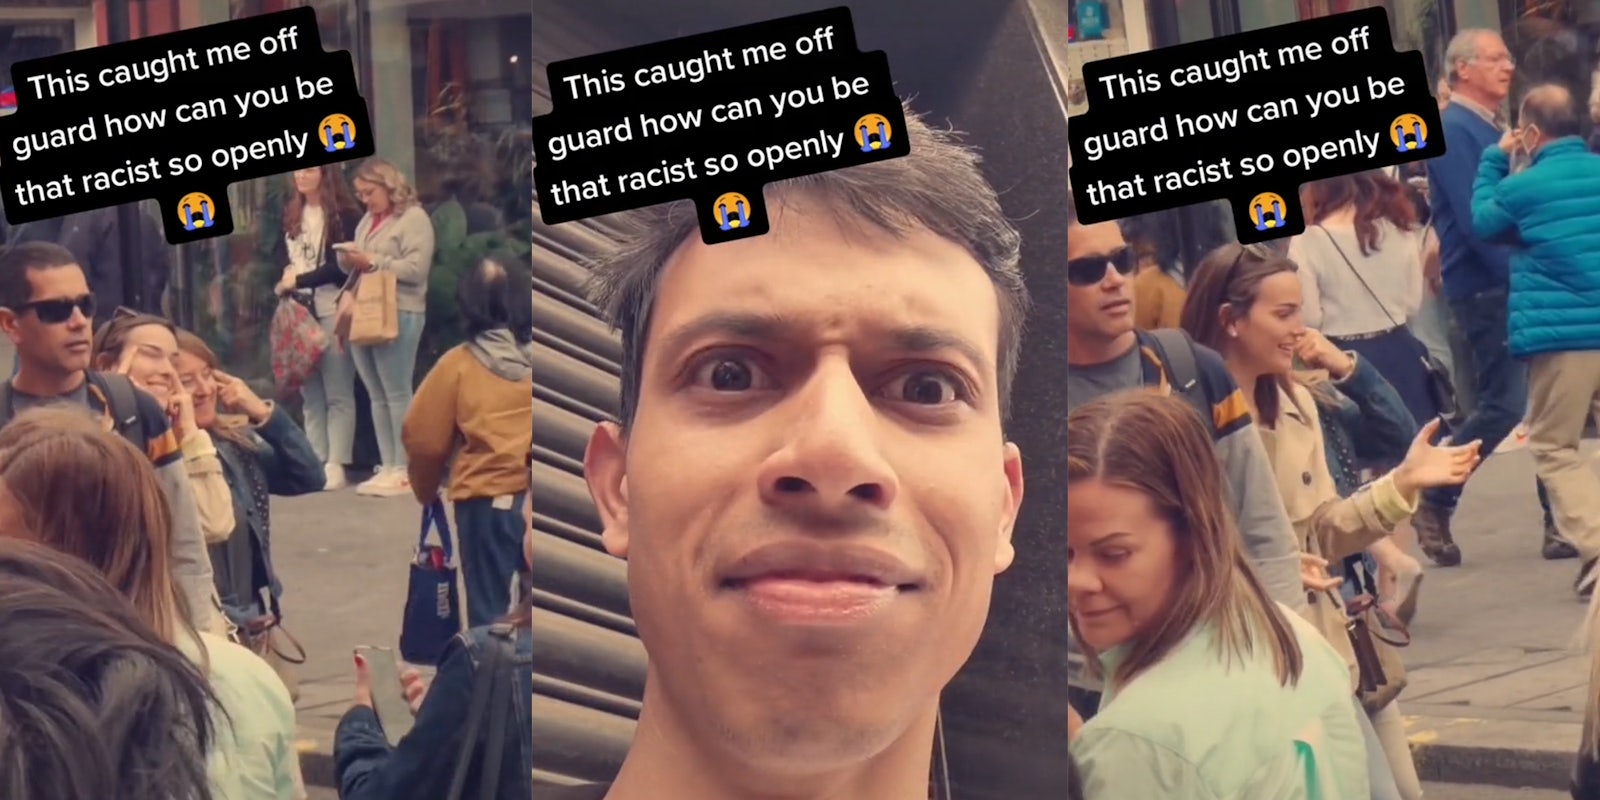 young women in street stretching their eyes with their hands for a photo (l) dismayed man (c) woman reaching for her phone after photo (r) all with caption 'This caught me off guard how can you be that racist so openly'